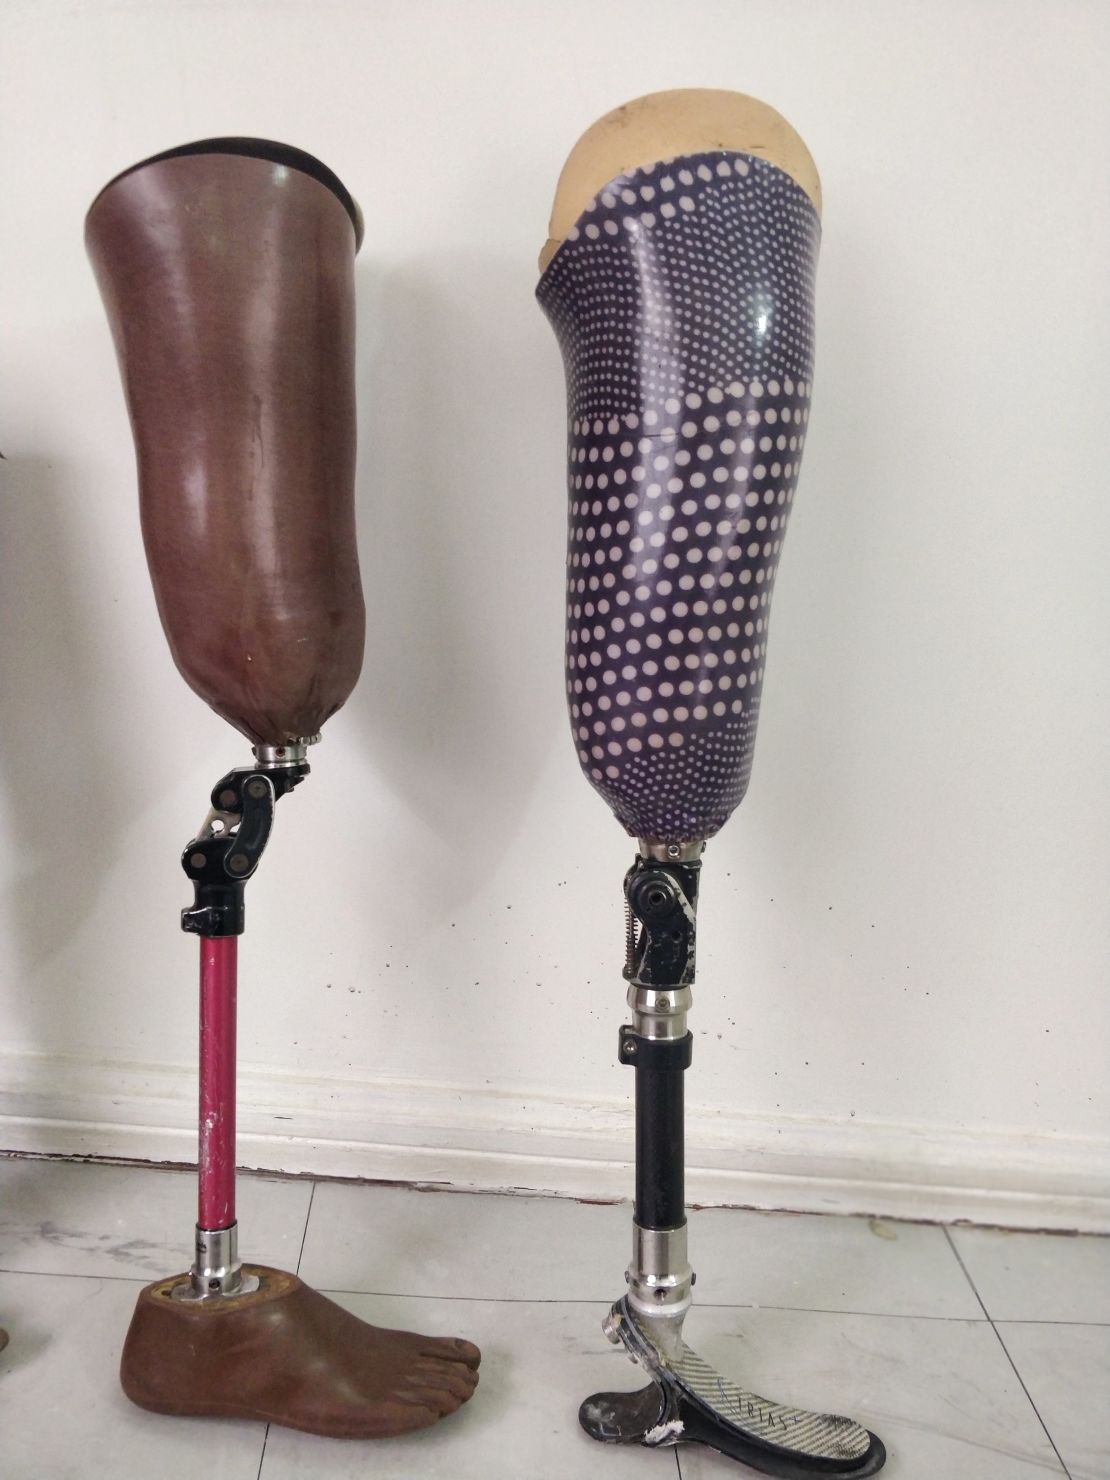 Prosthetic limbs for display at The Irede Foundation